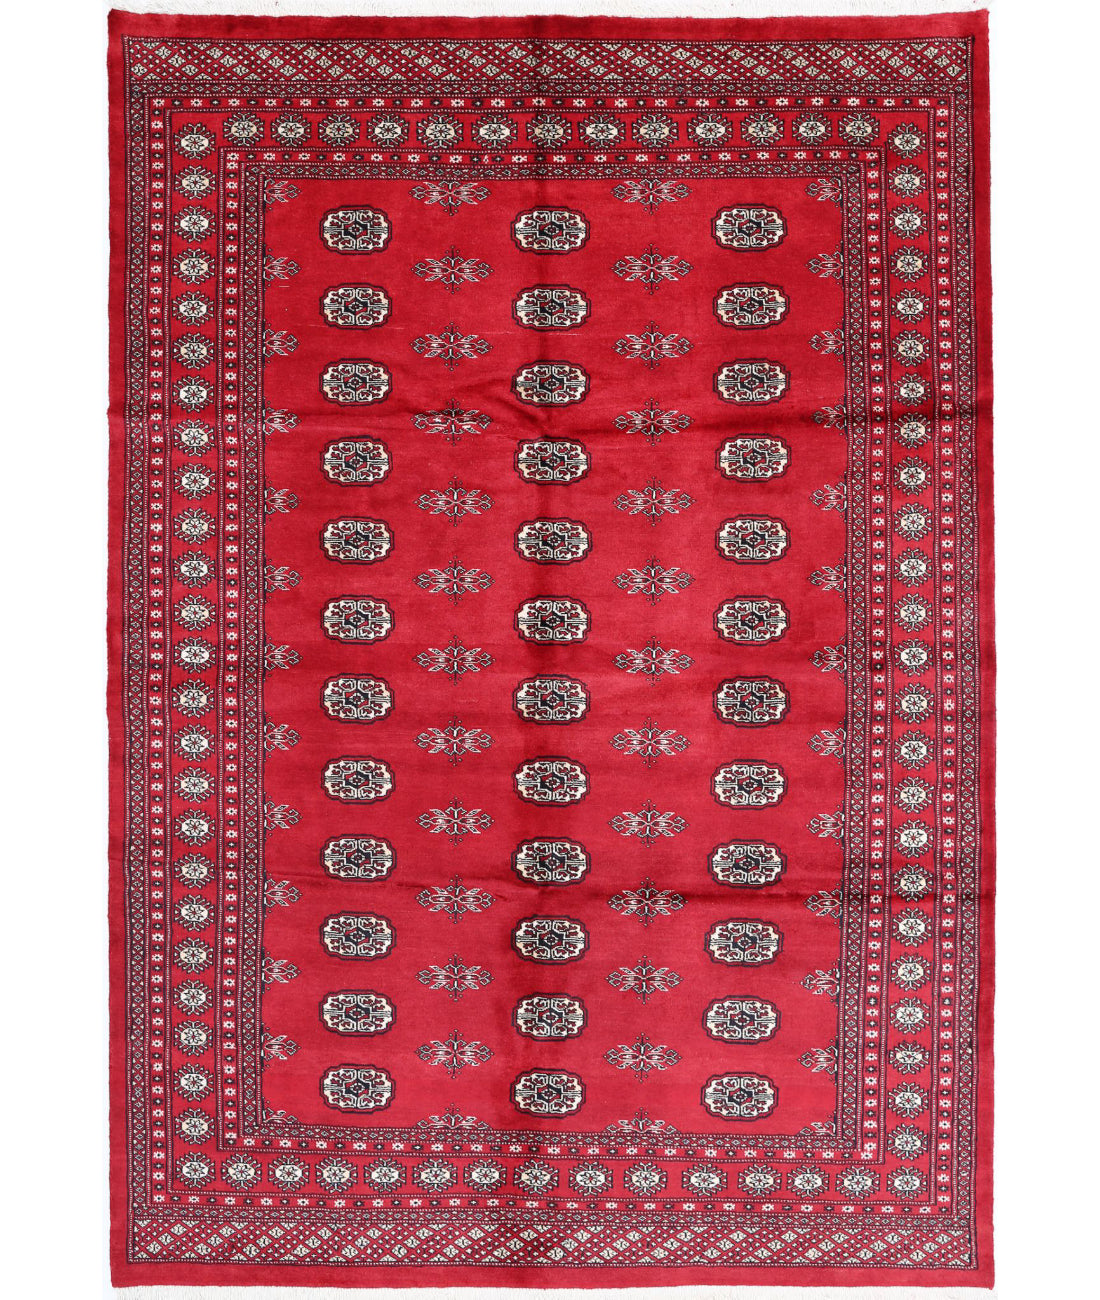 Hand Knotted Tribal Bokhara Wool Rug - 6'1'' x 8'11'' 6'1'' x 8'11'' (183 X 268) / Red / Ivory